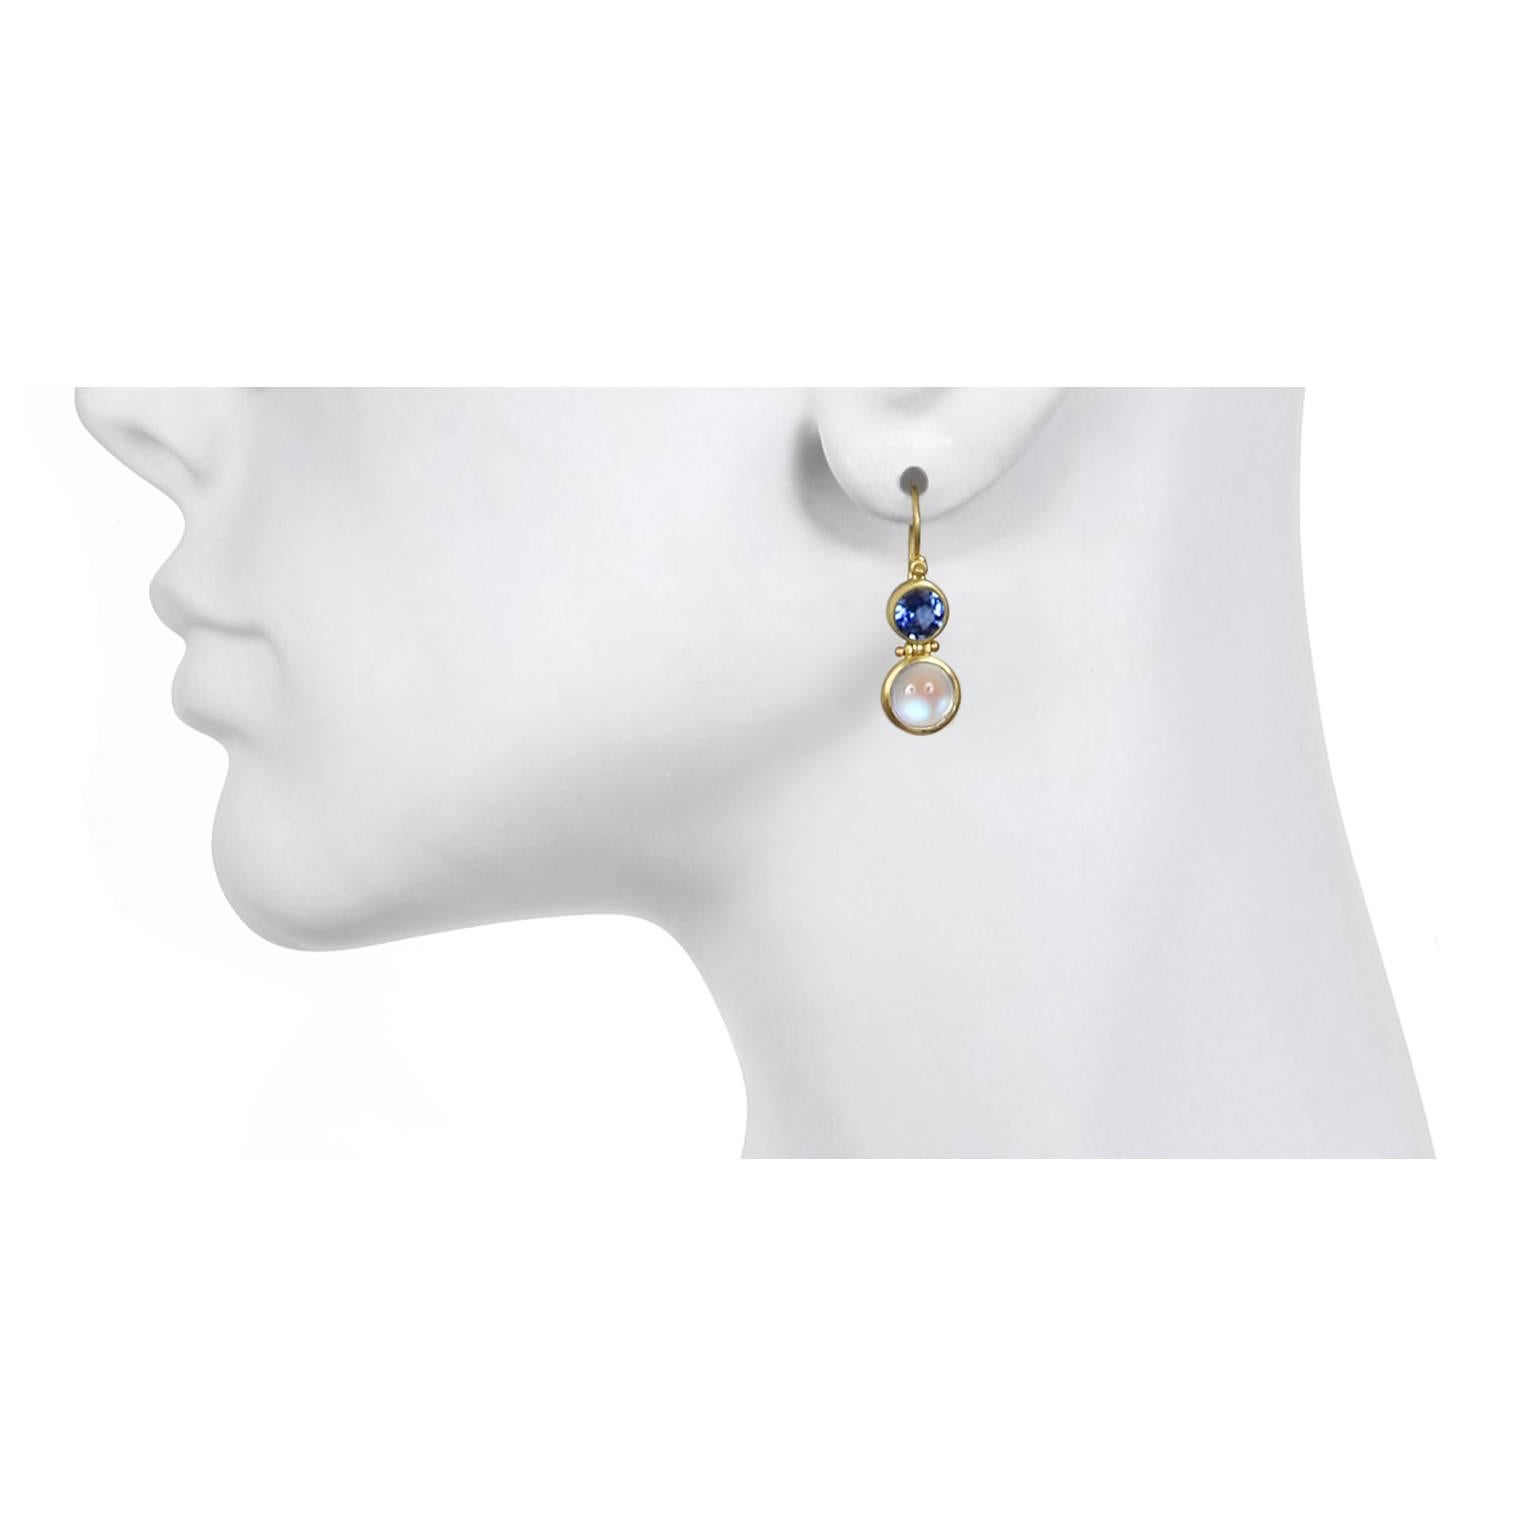 Exquisite and eye-catching, these uniquely designed earrings are handcrafted in18k gold.  Ceylon Moonstone cabochons are paired with vivid blue  Ceylon Sapphires in Faye Kim's signature double hinge design. 

Sapphire 1.01 carats twt
Moonstone 3.05